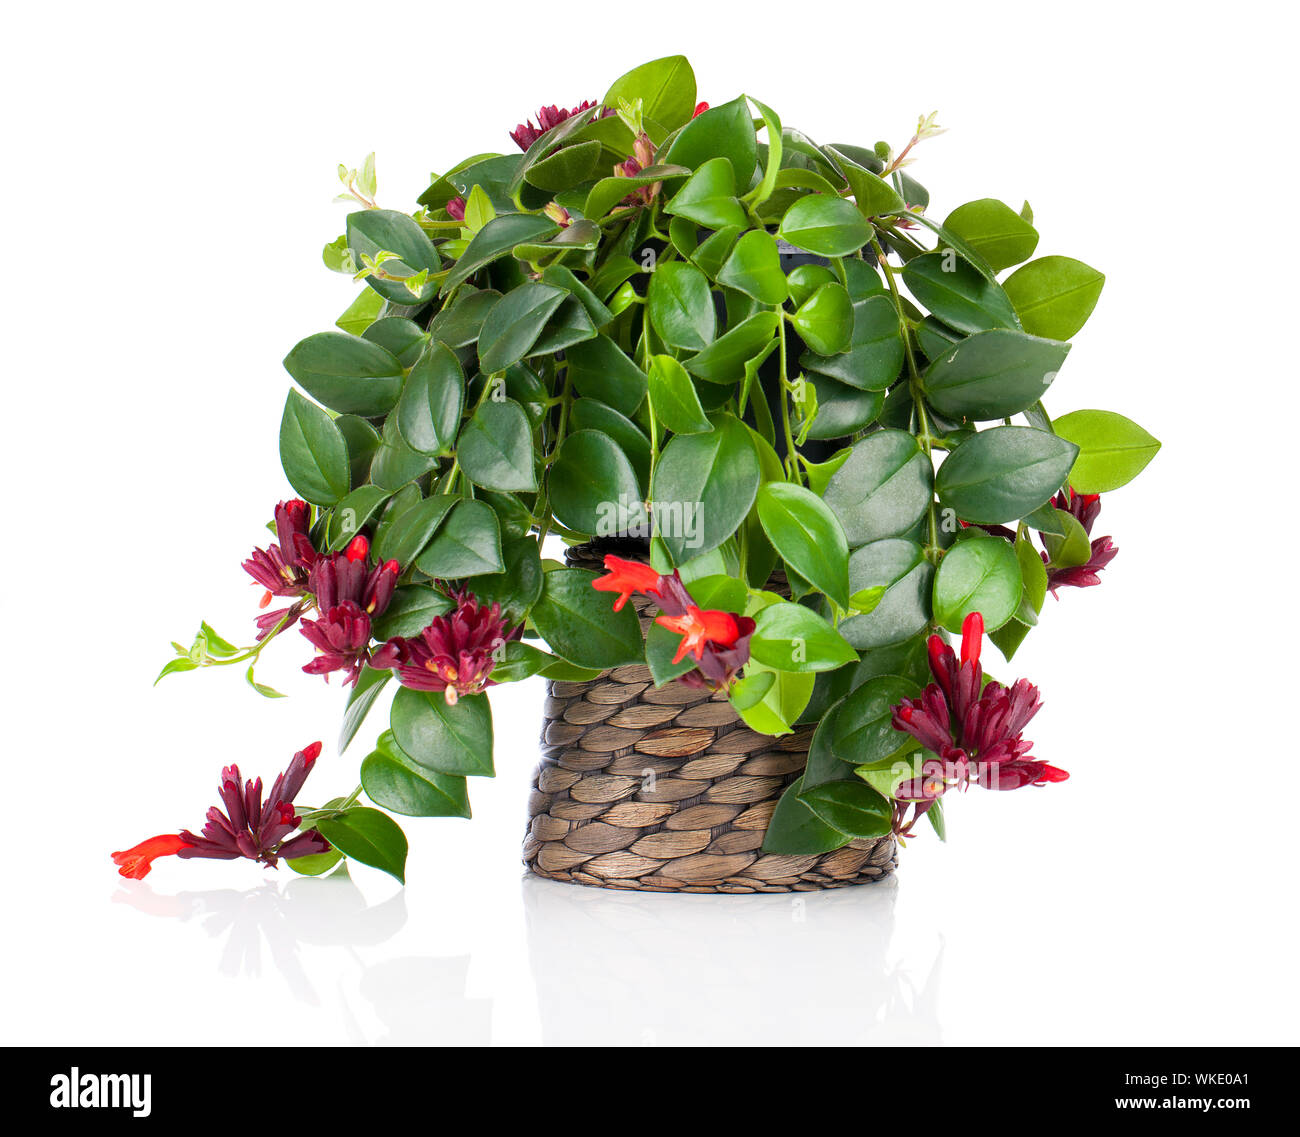 Lipstick Plant (Aeschynanthus radicans) in pot, isolated on white background Stock Photo